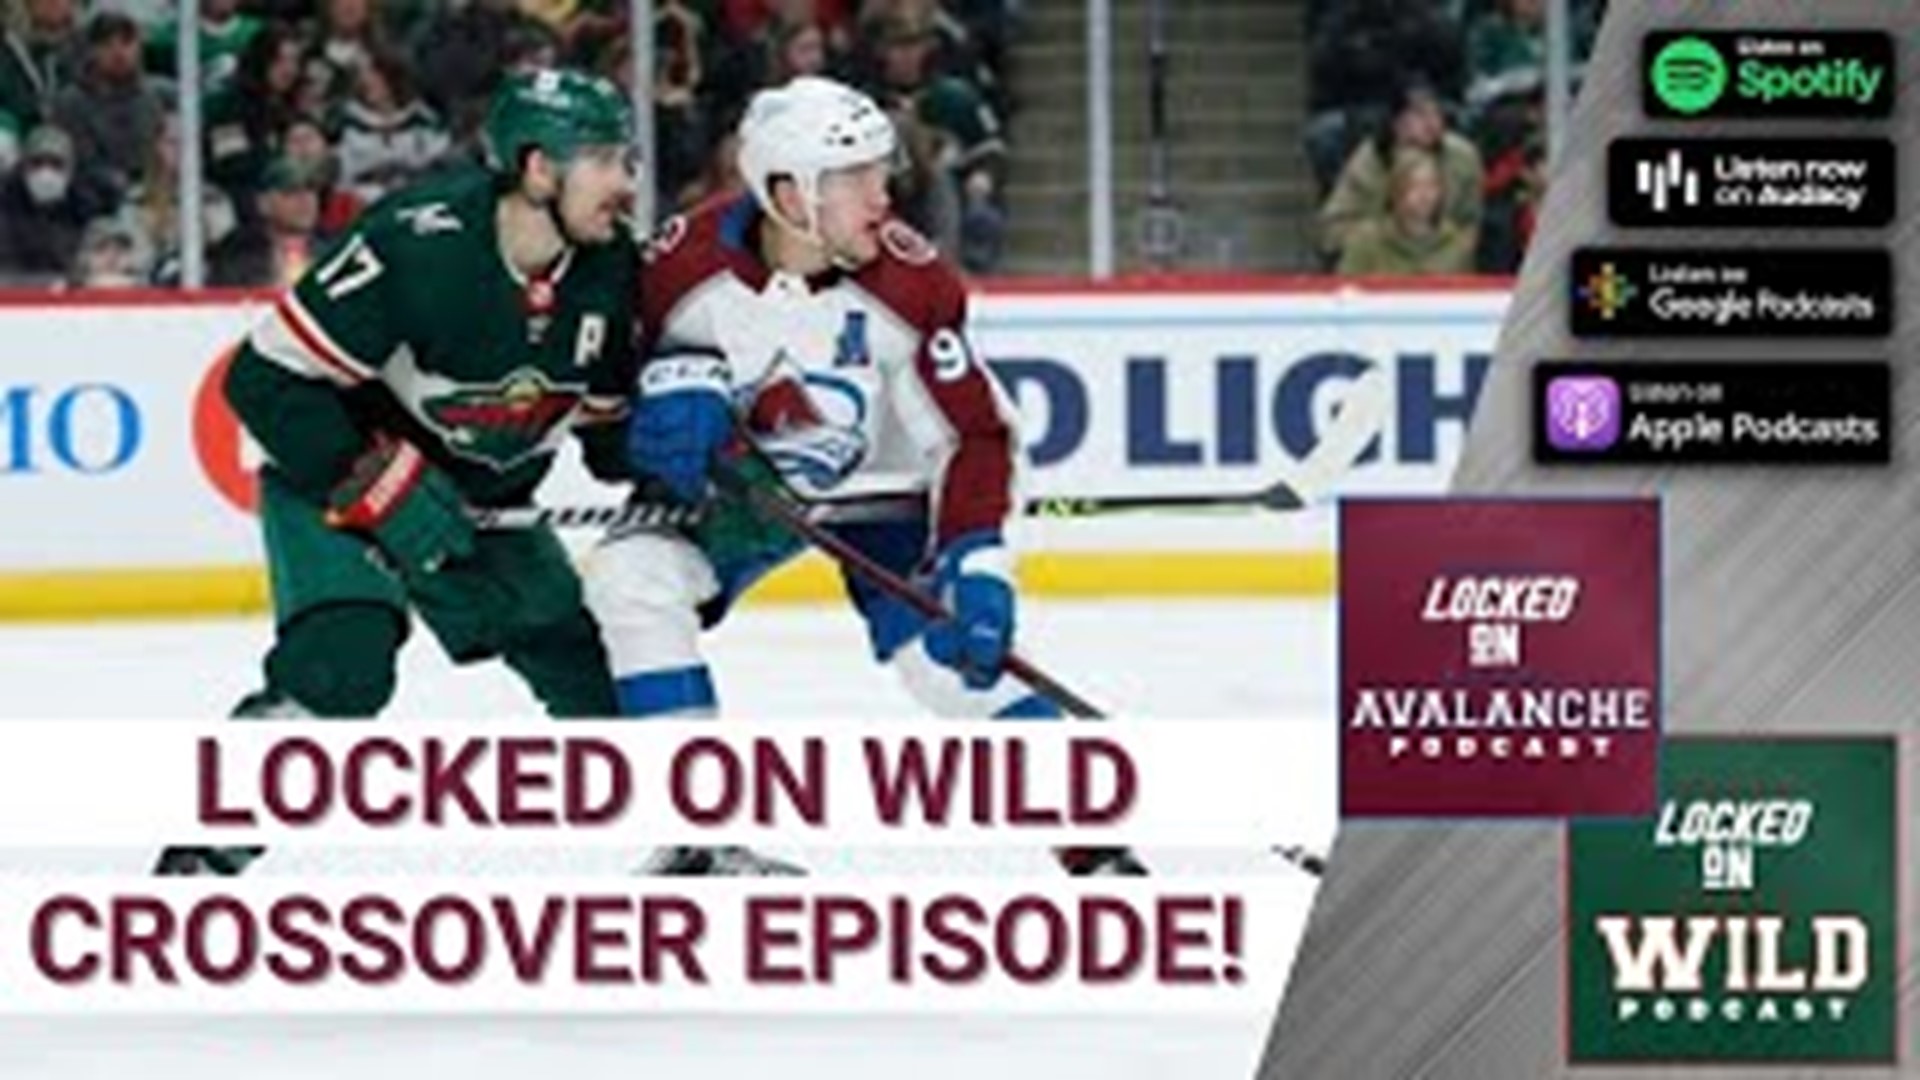 Seth Toupal from Locked on Wild joins us to share what the offseason looked like for one of the Colorado Avalanche's biggest rivals, the Minnesota Wild.